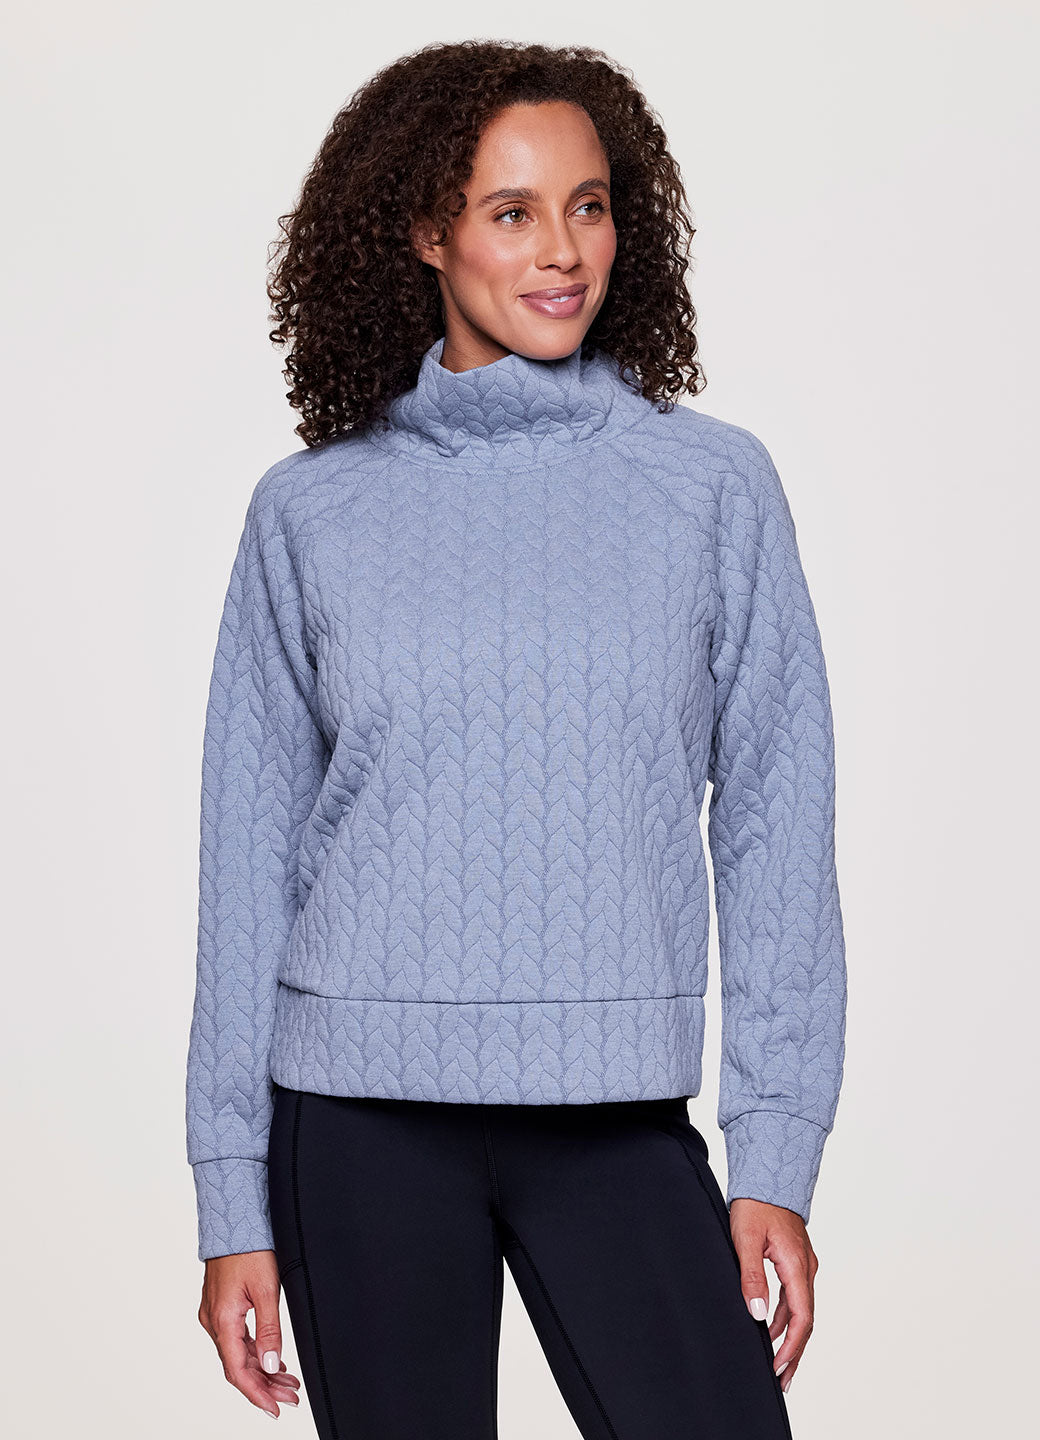 Lennox Cable Cowl Neck Pullover